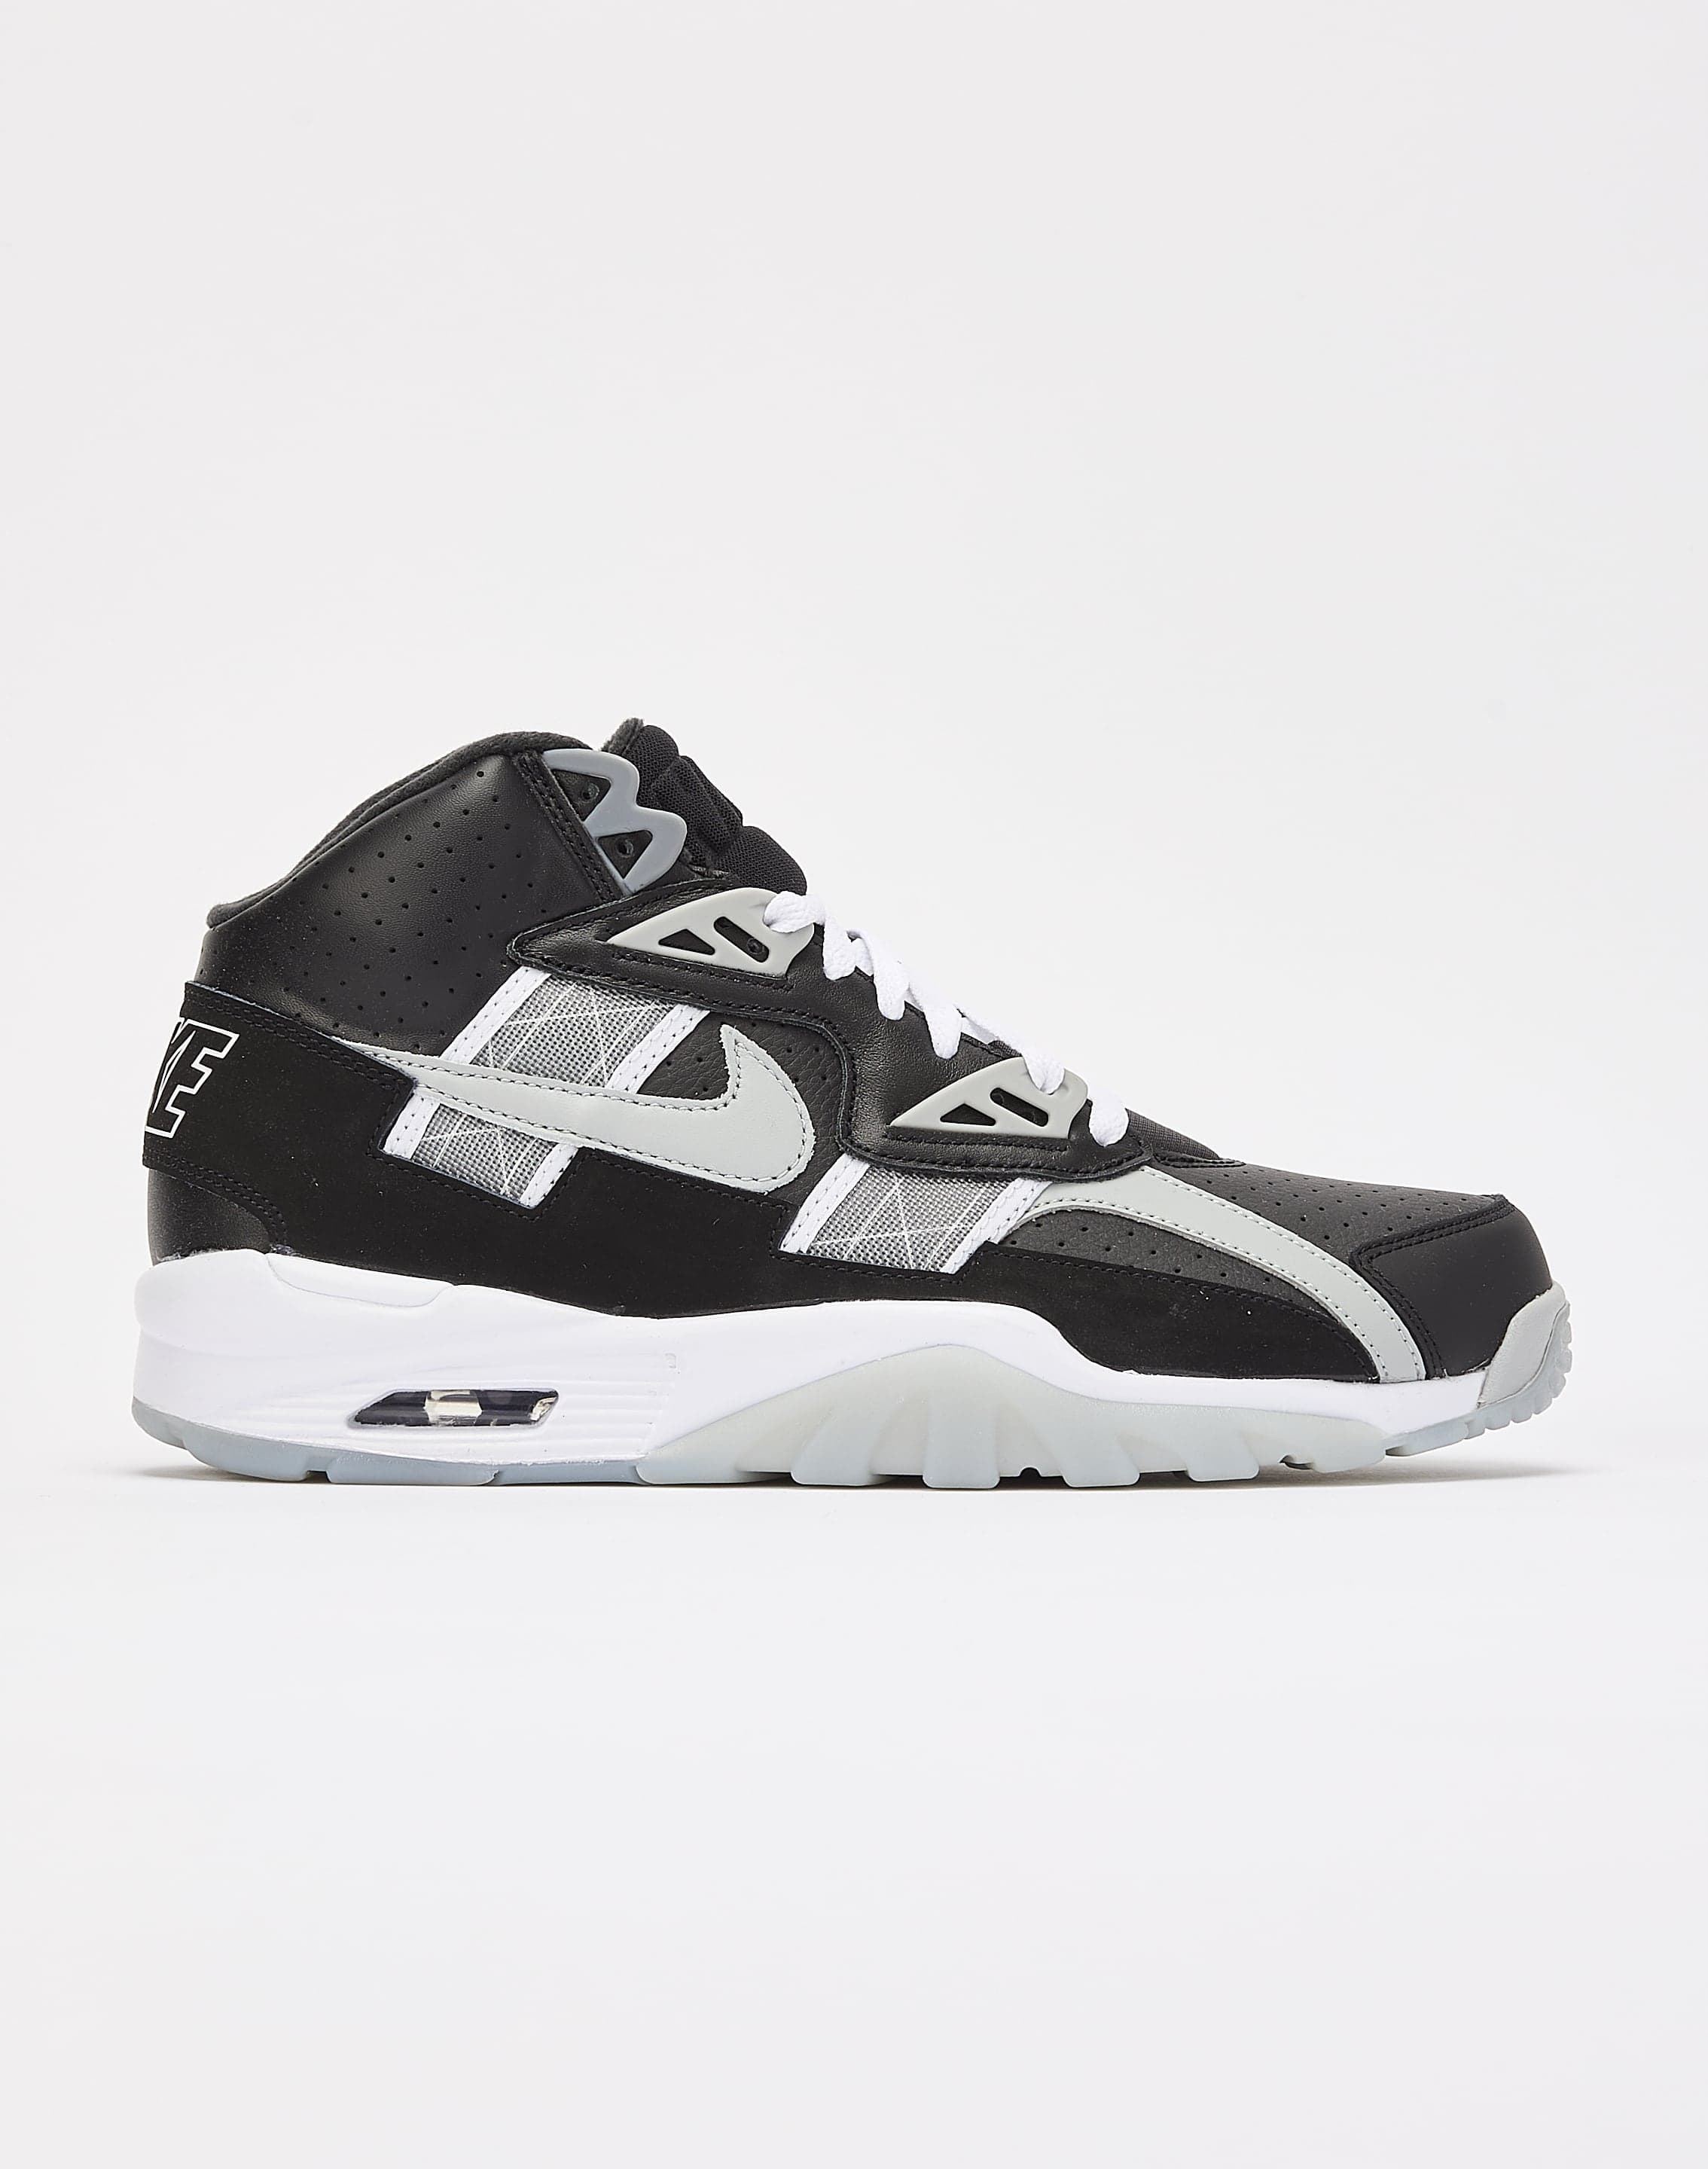 Nike Air Trainer SC High Raiders Just Released